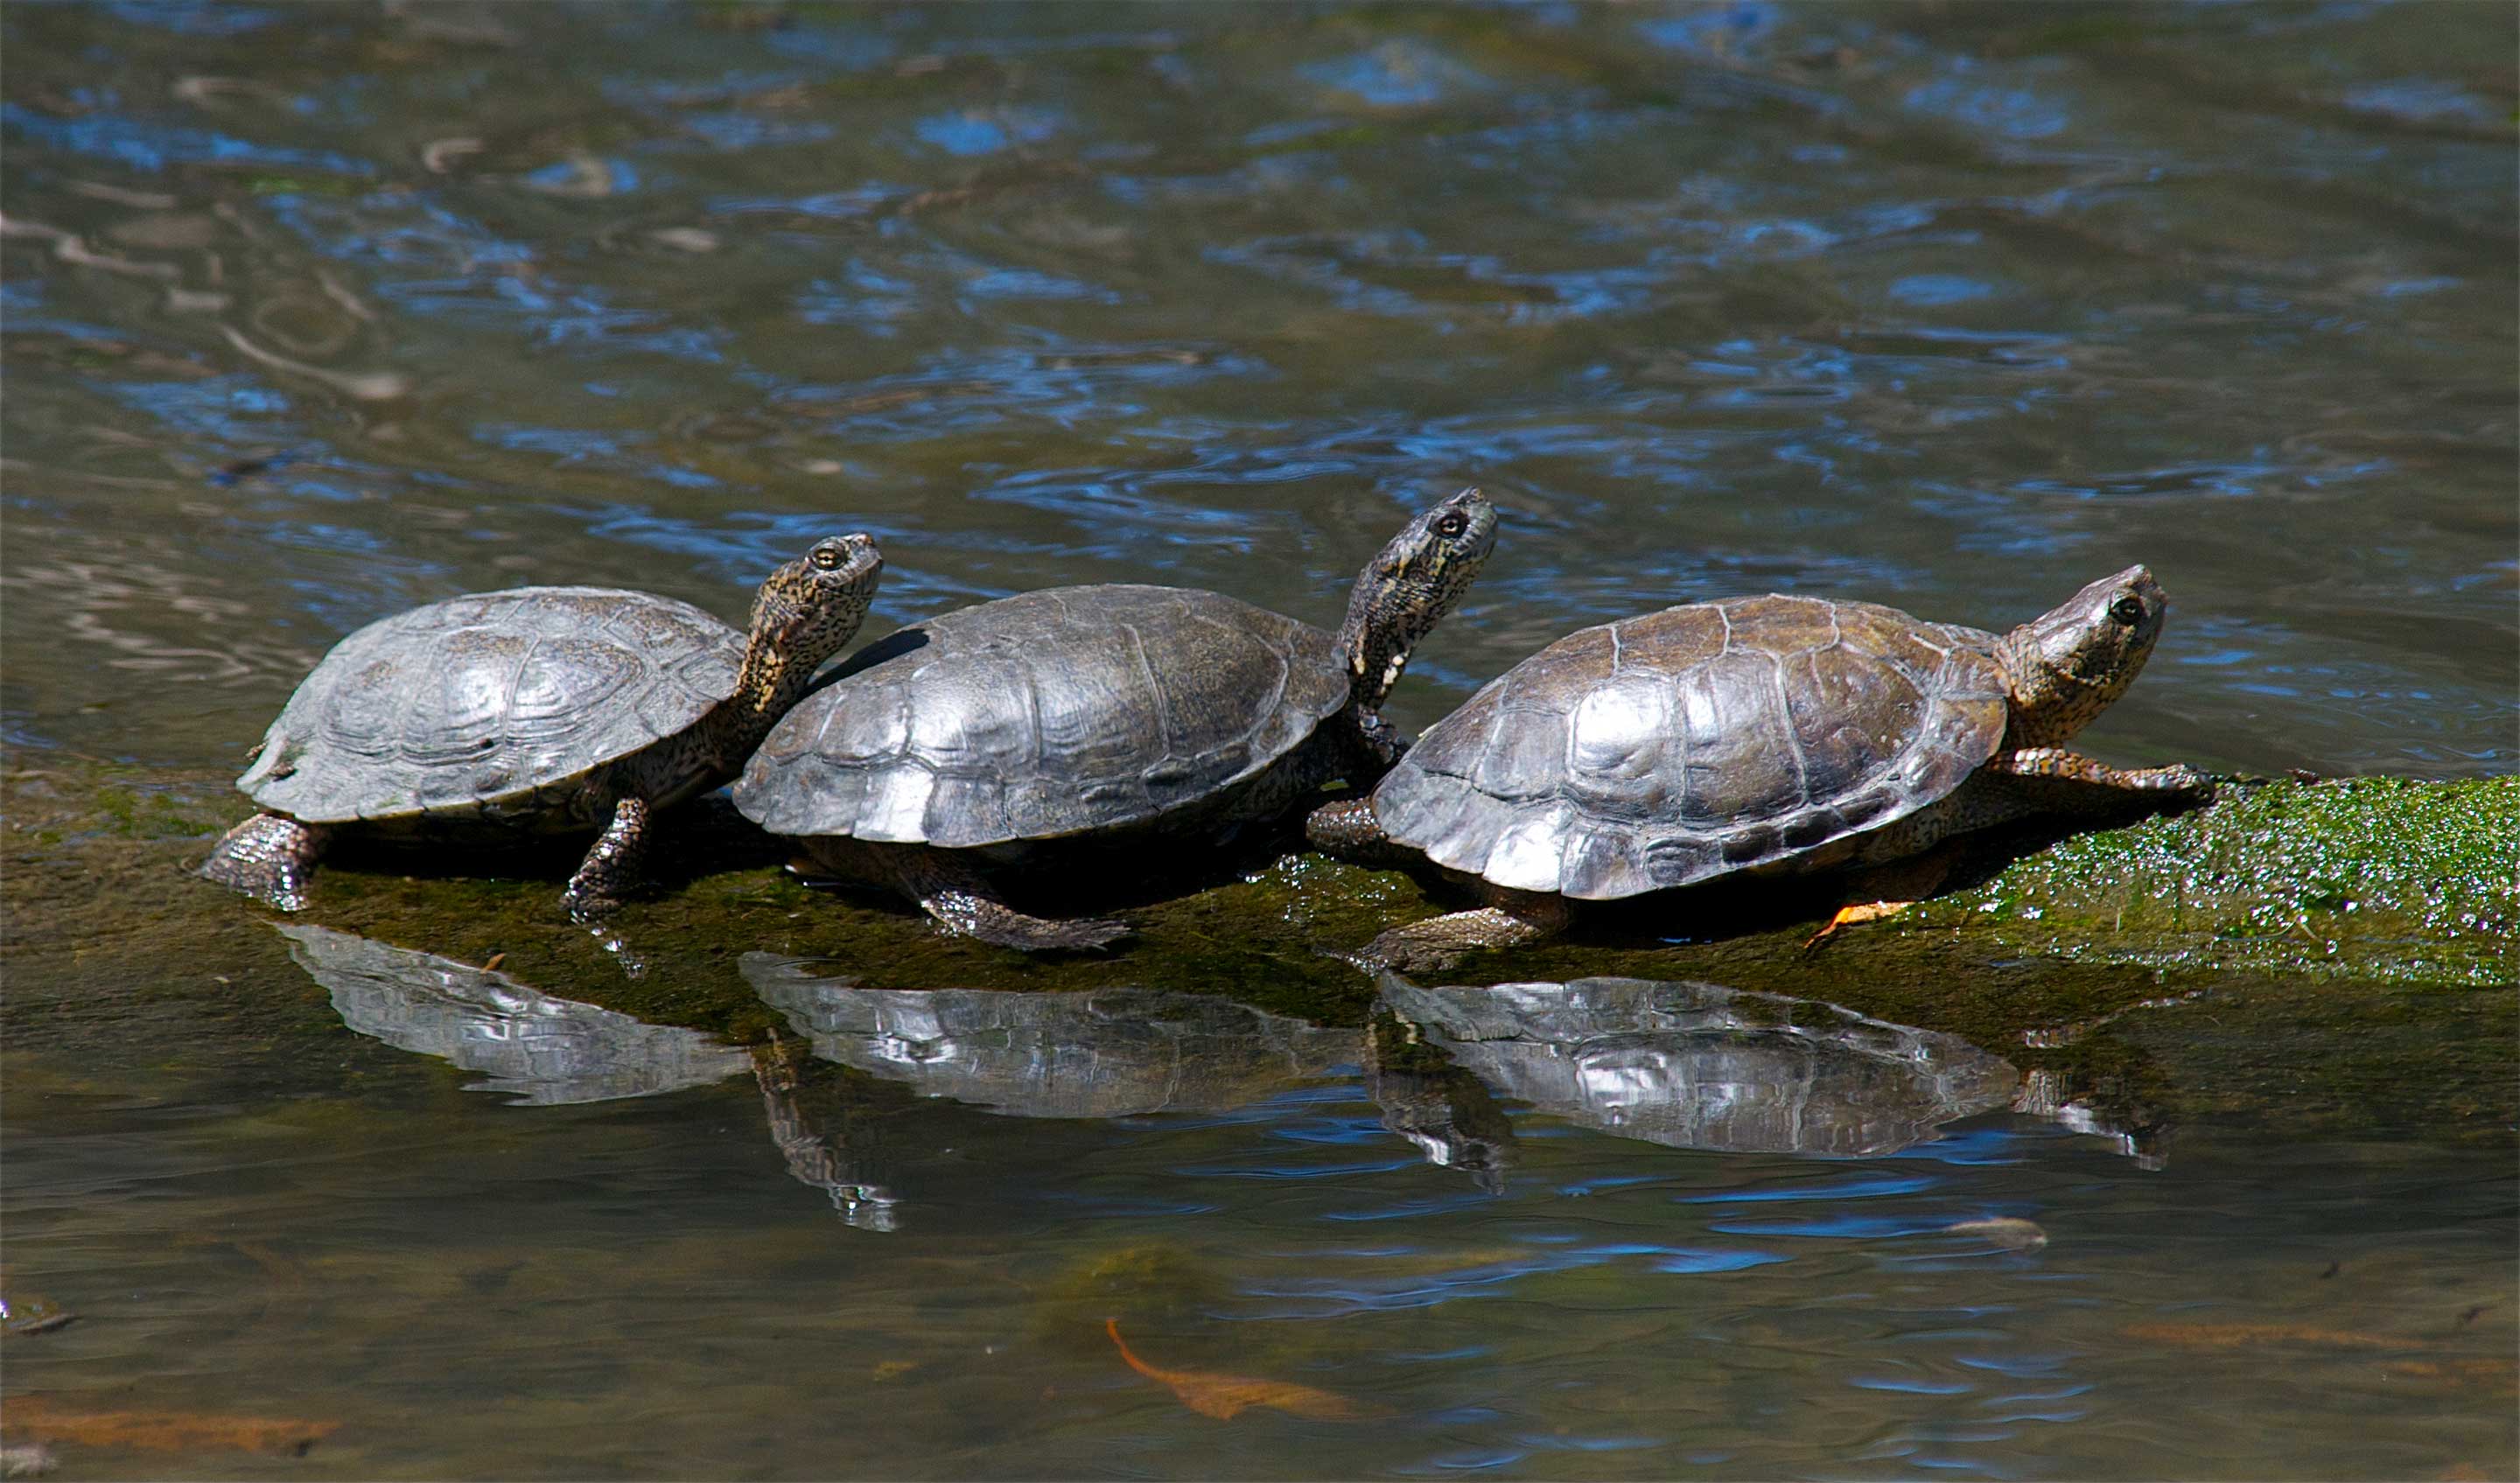 Three mud turtles
on a small log
surrounded by water.
